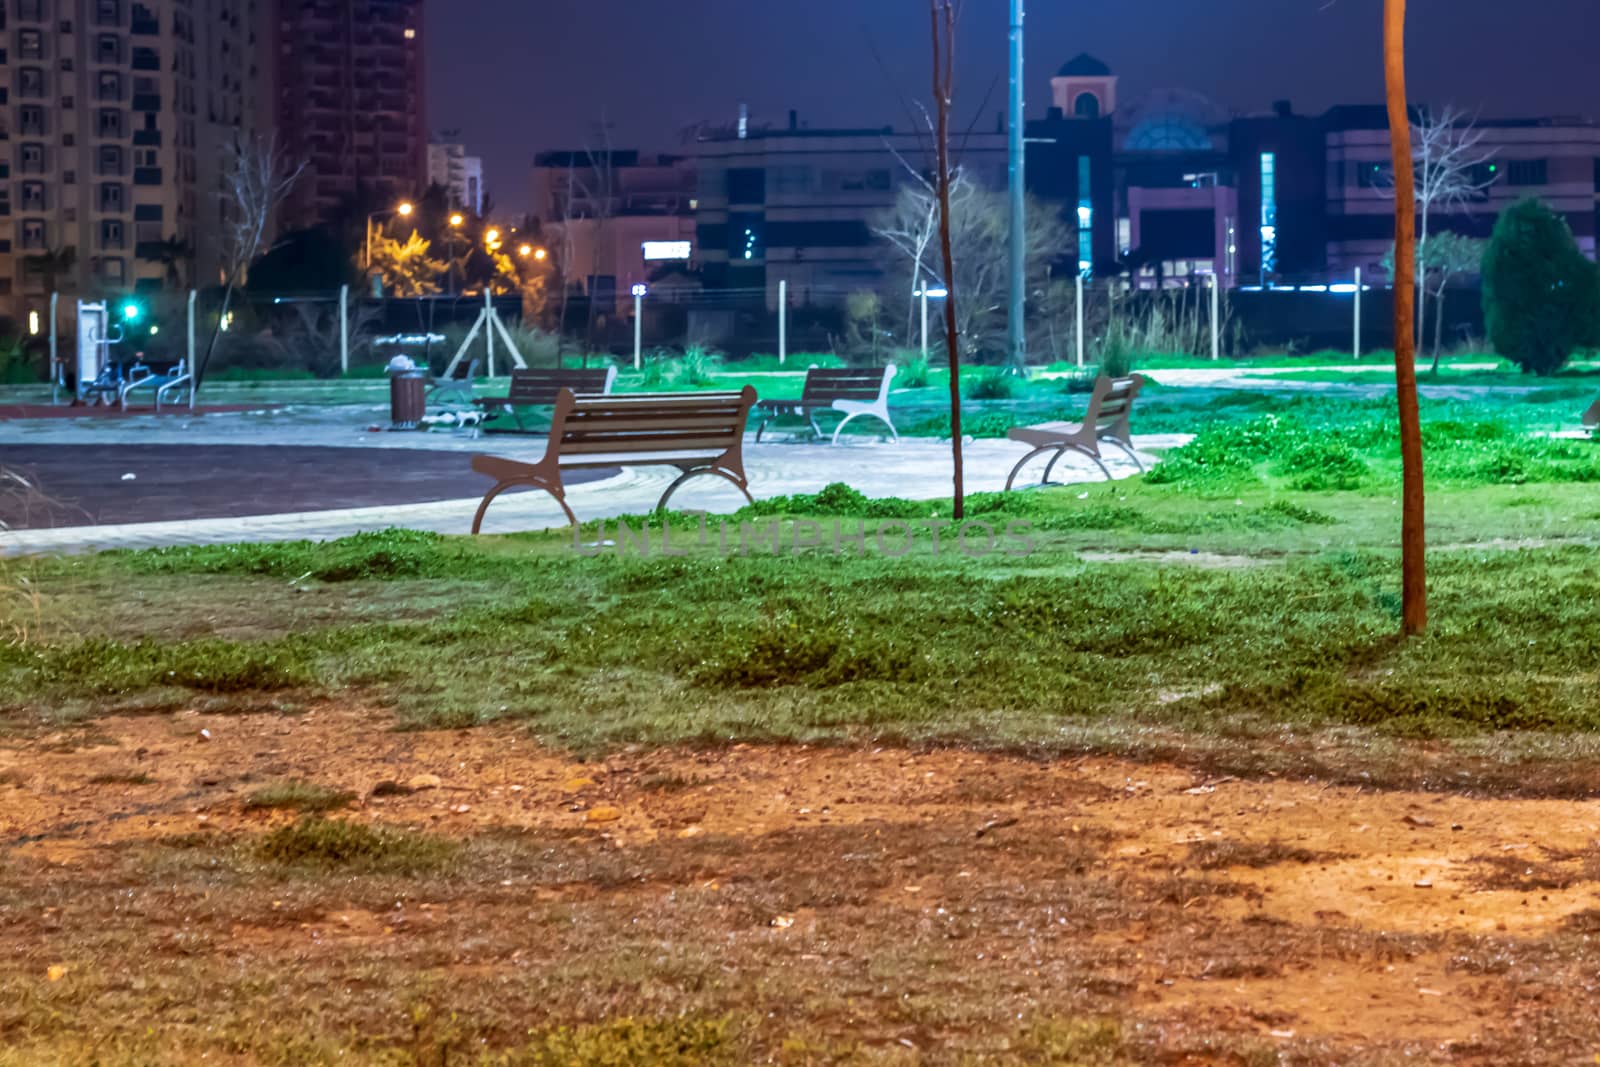 a night shoot from a park at middle of a city. photo has taken from izmir/turkey.